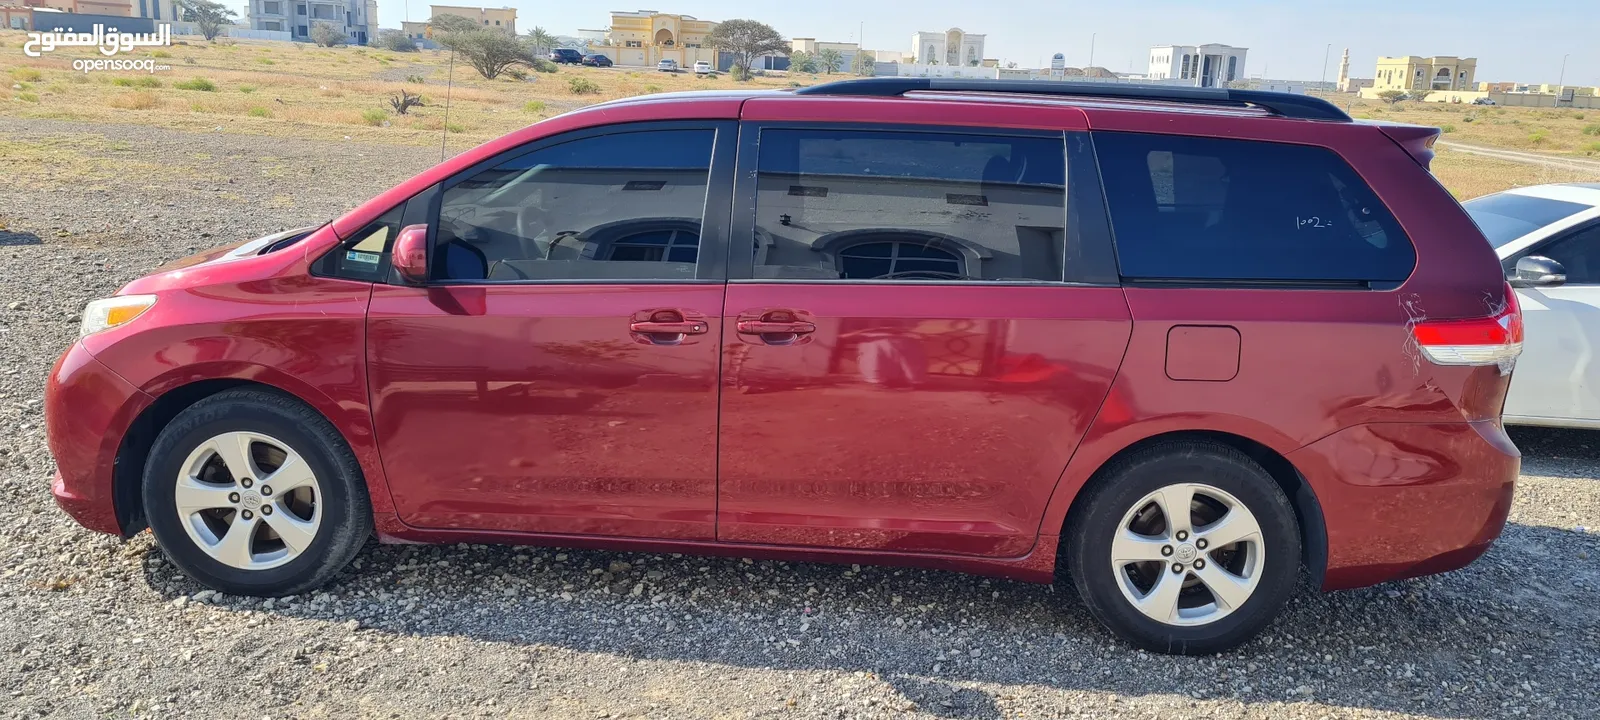 Toyota Sienna 2013 for Sale